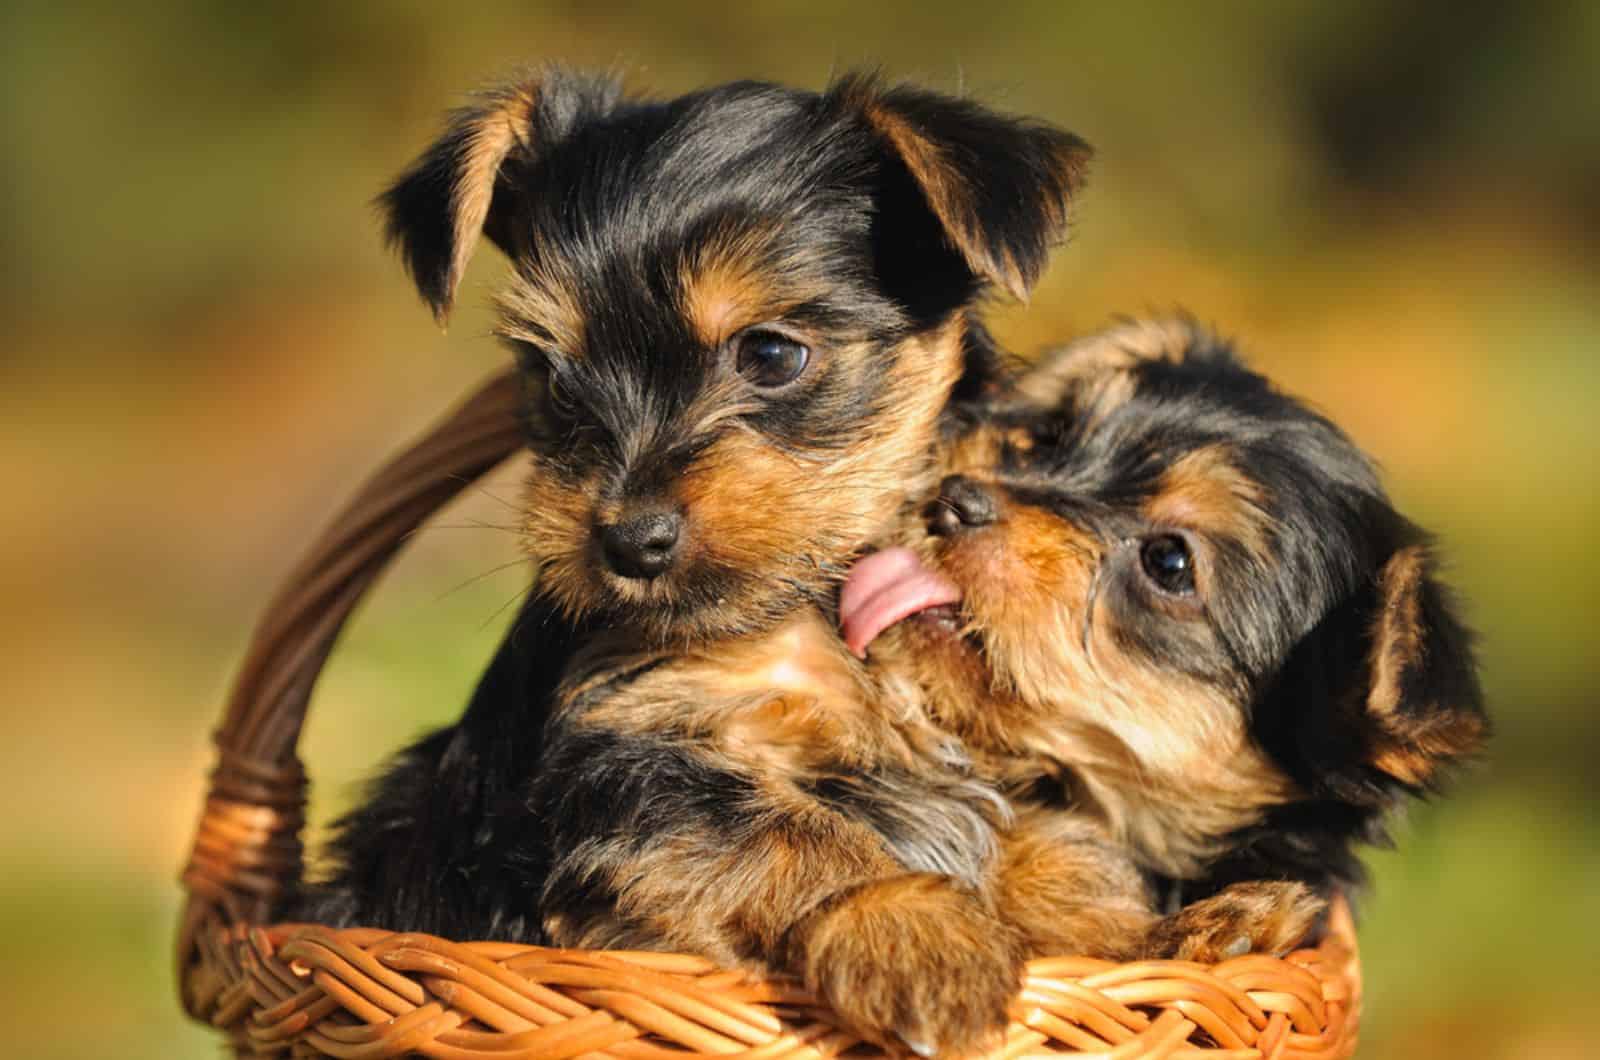 two yorkie puppies in a basket